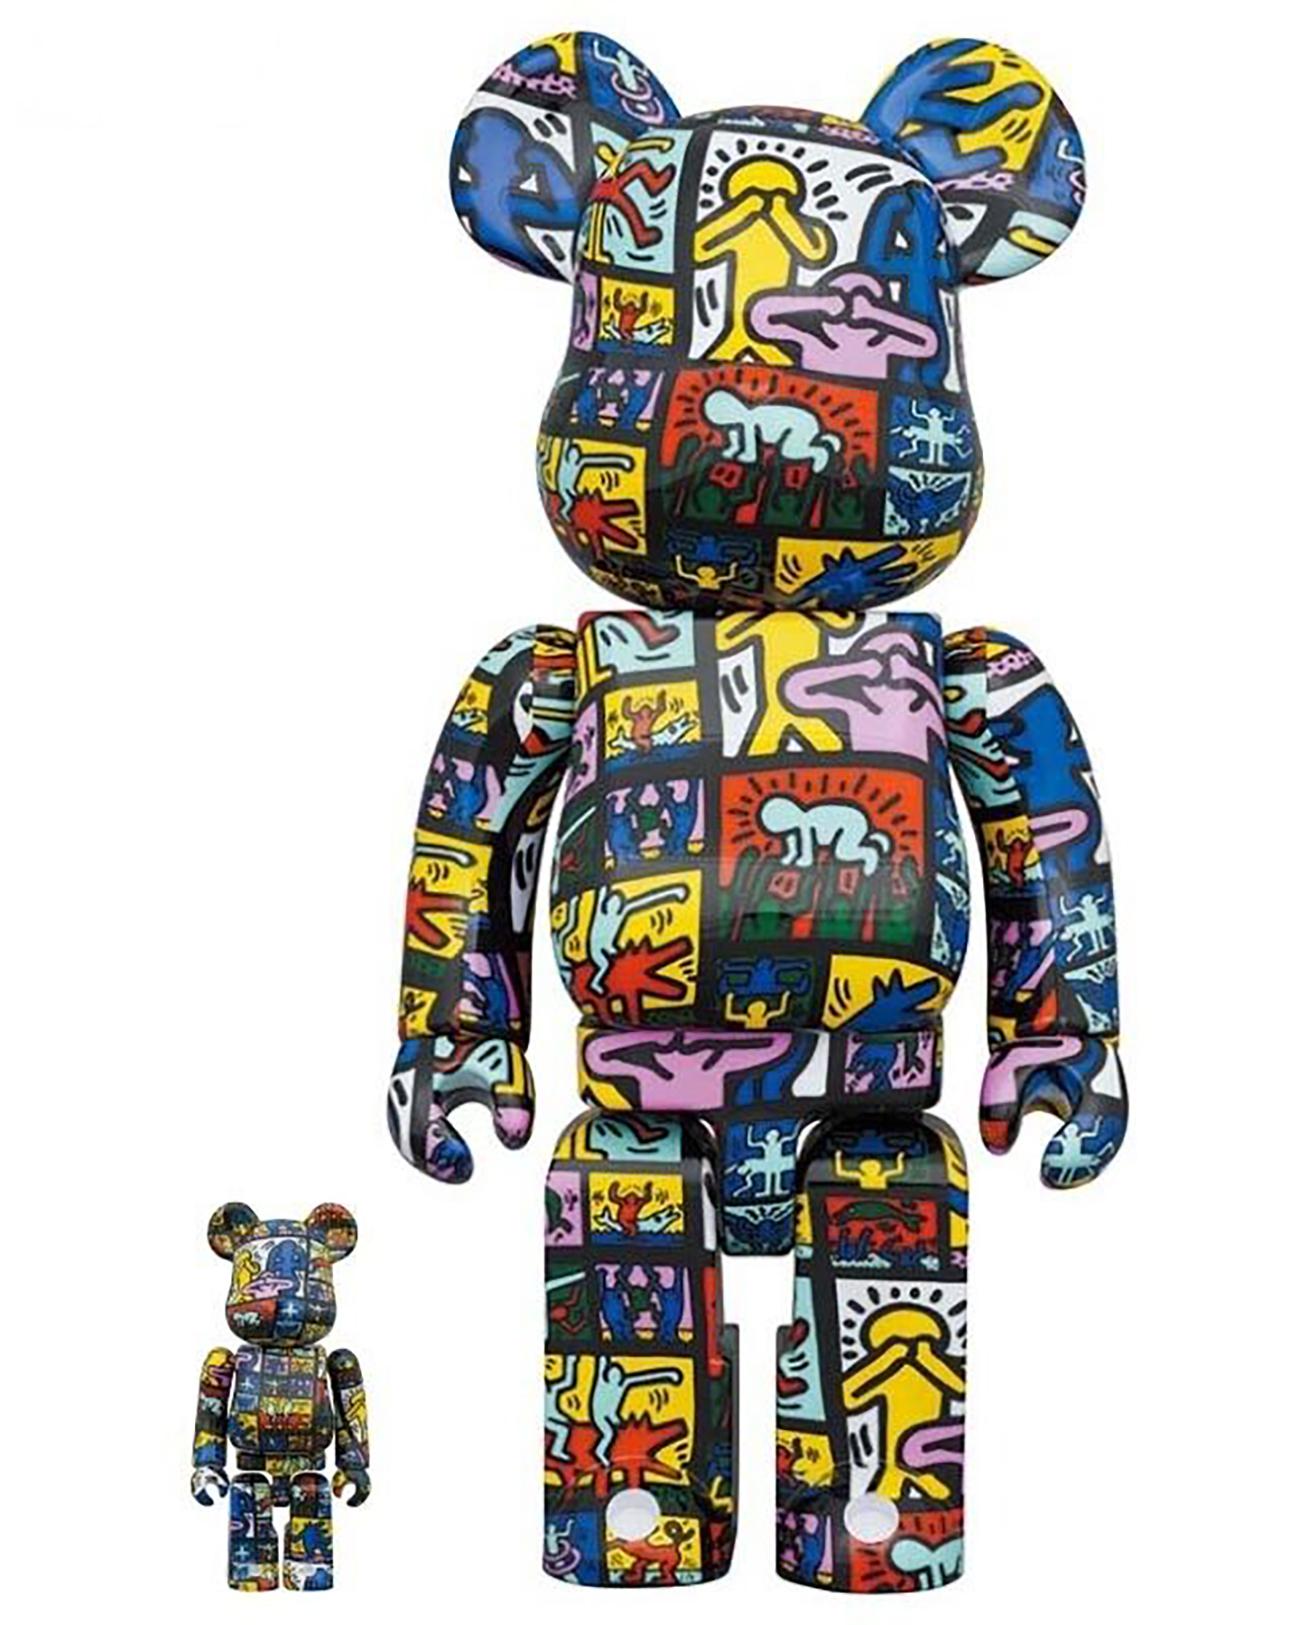 Keith Haring Bearbrick 400%  (Keith Haring BE@RBRICK)  - Sculpture by (after) Keith Haring